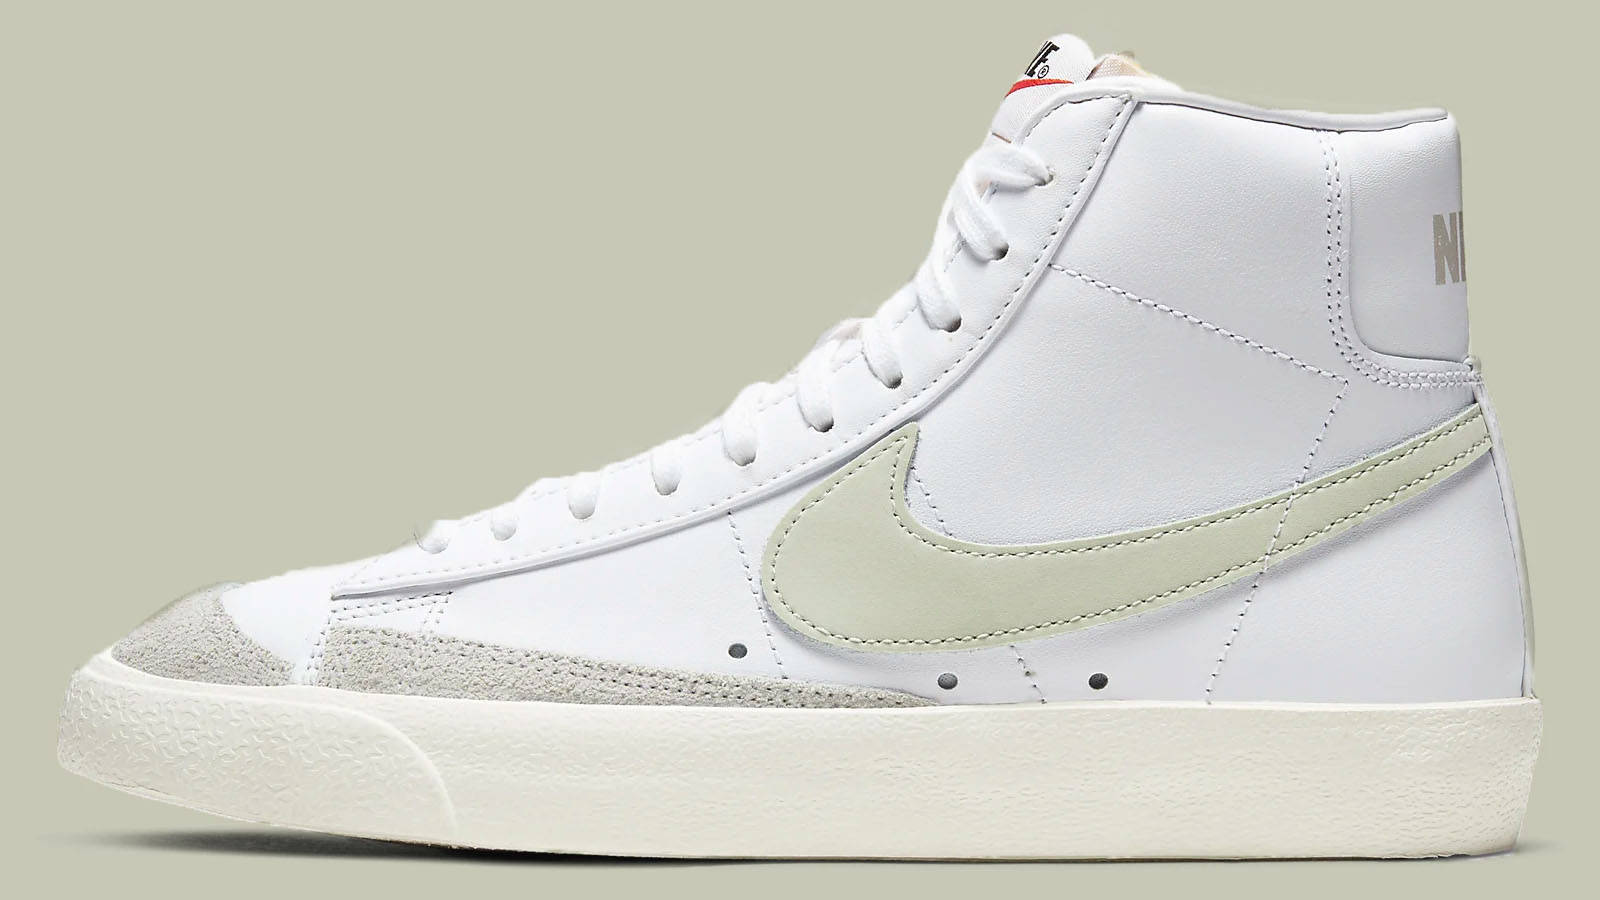 The Nike Blazer Mid ’77 ‘White Sail’ Has Just Dropped On Nike! | The ...